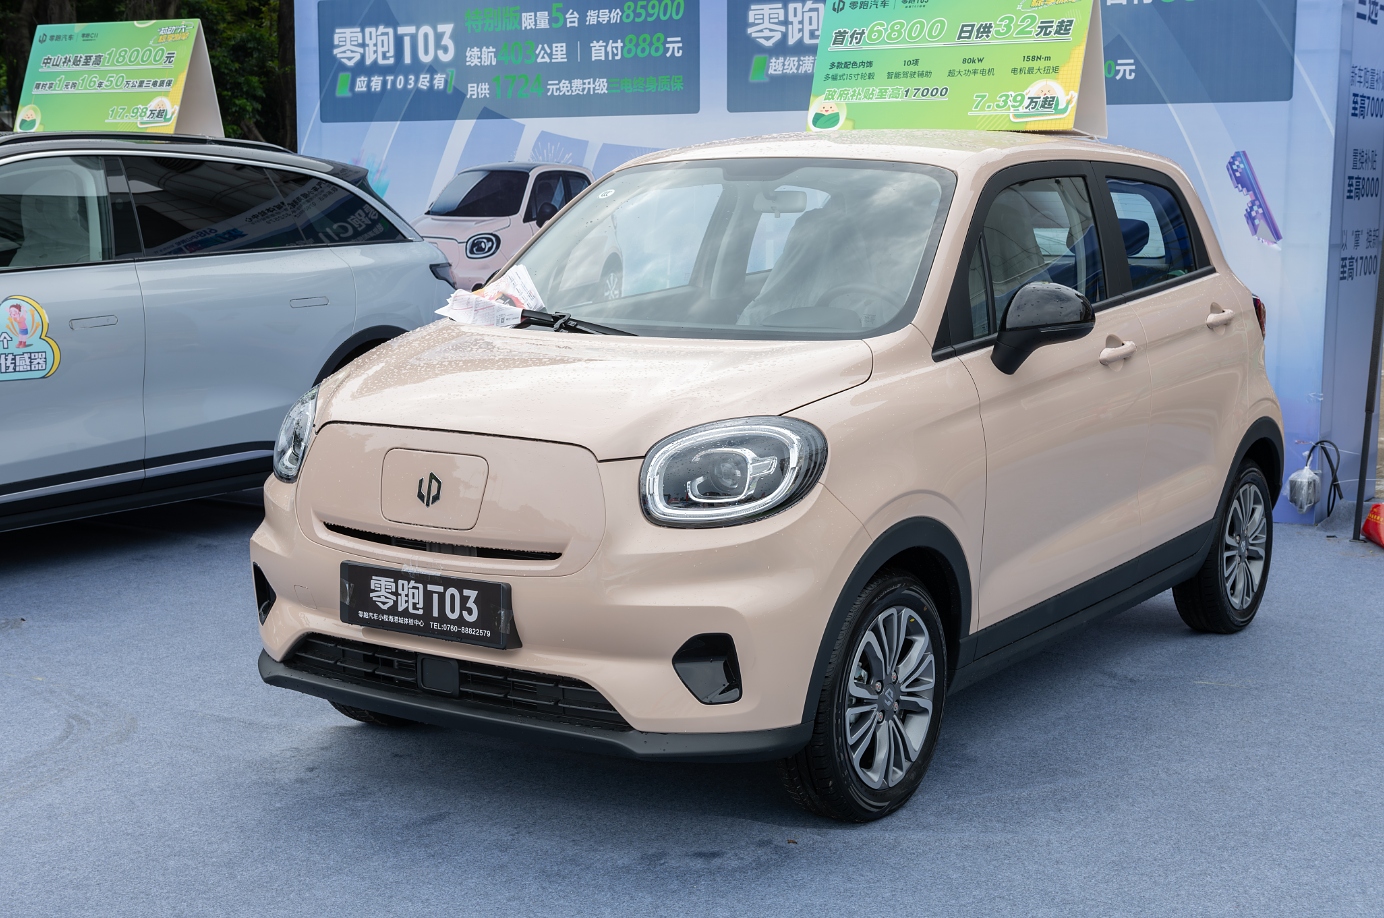 Stellantis proposes to open the doors of the Fiat factory in Turin to the Chinese Leapmotor